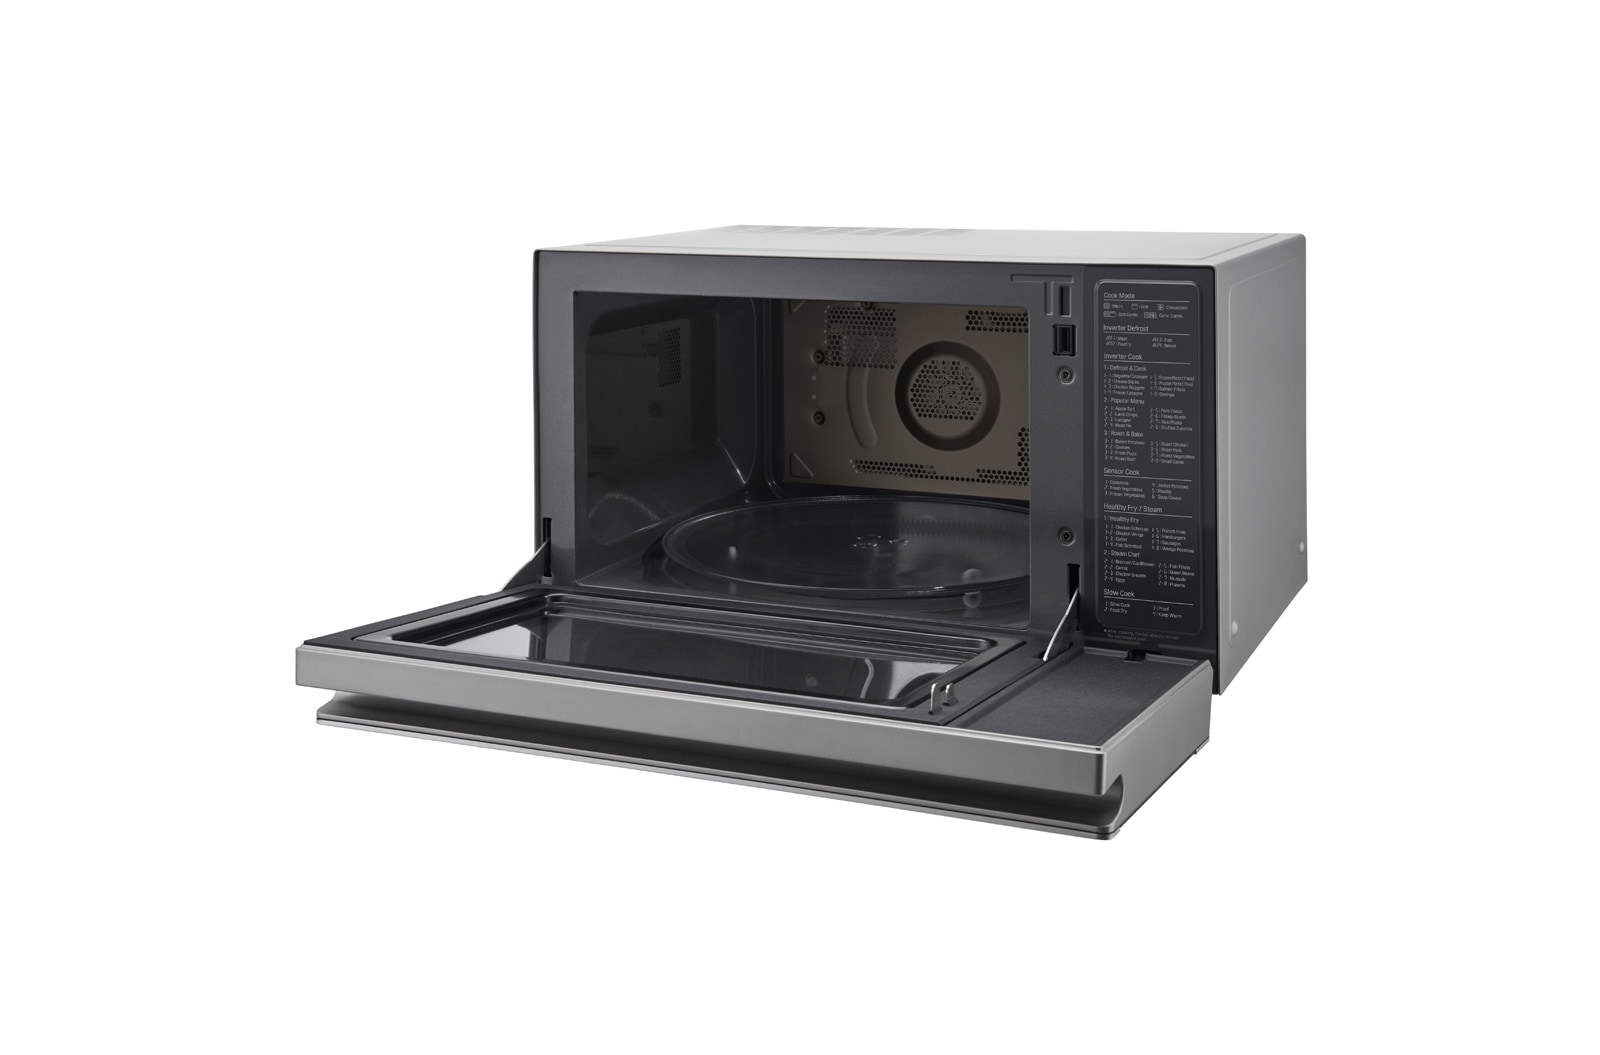 LG Microwaves MJ3966ASS 39L Microwave Convection Oven LG Australia